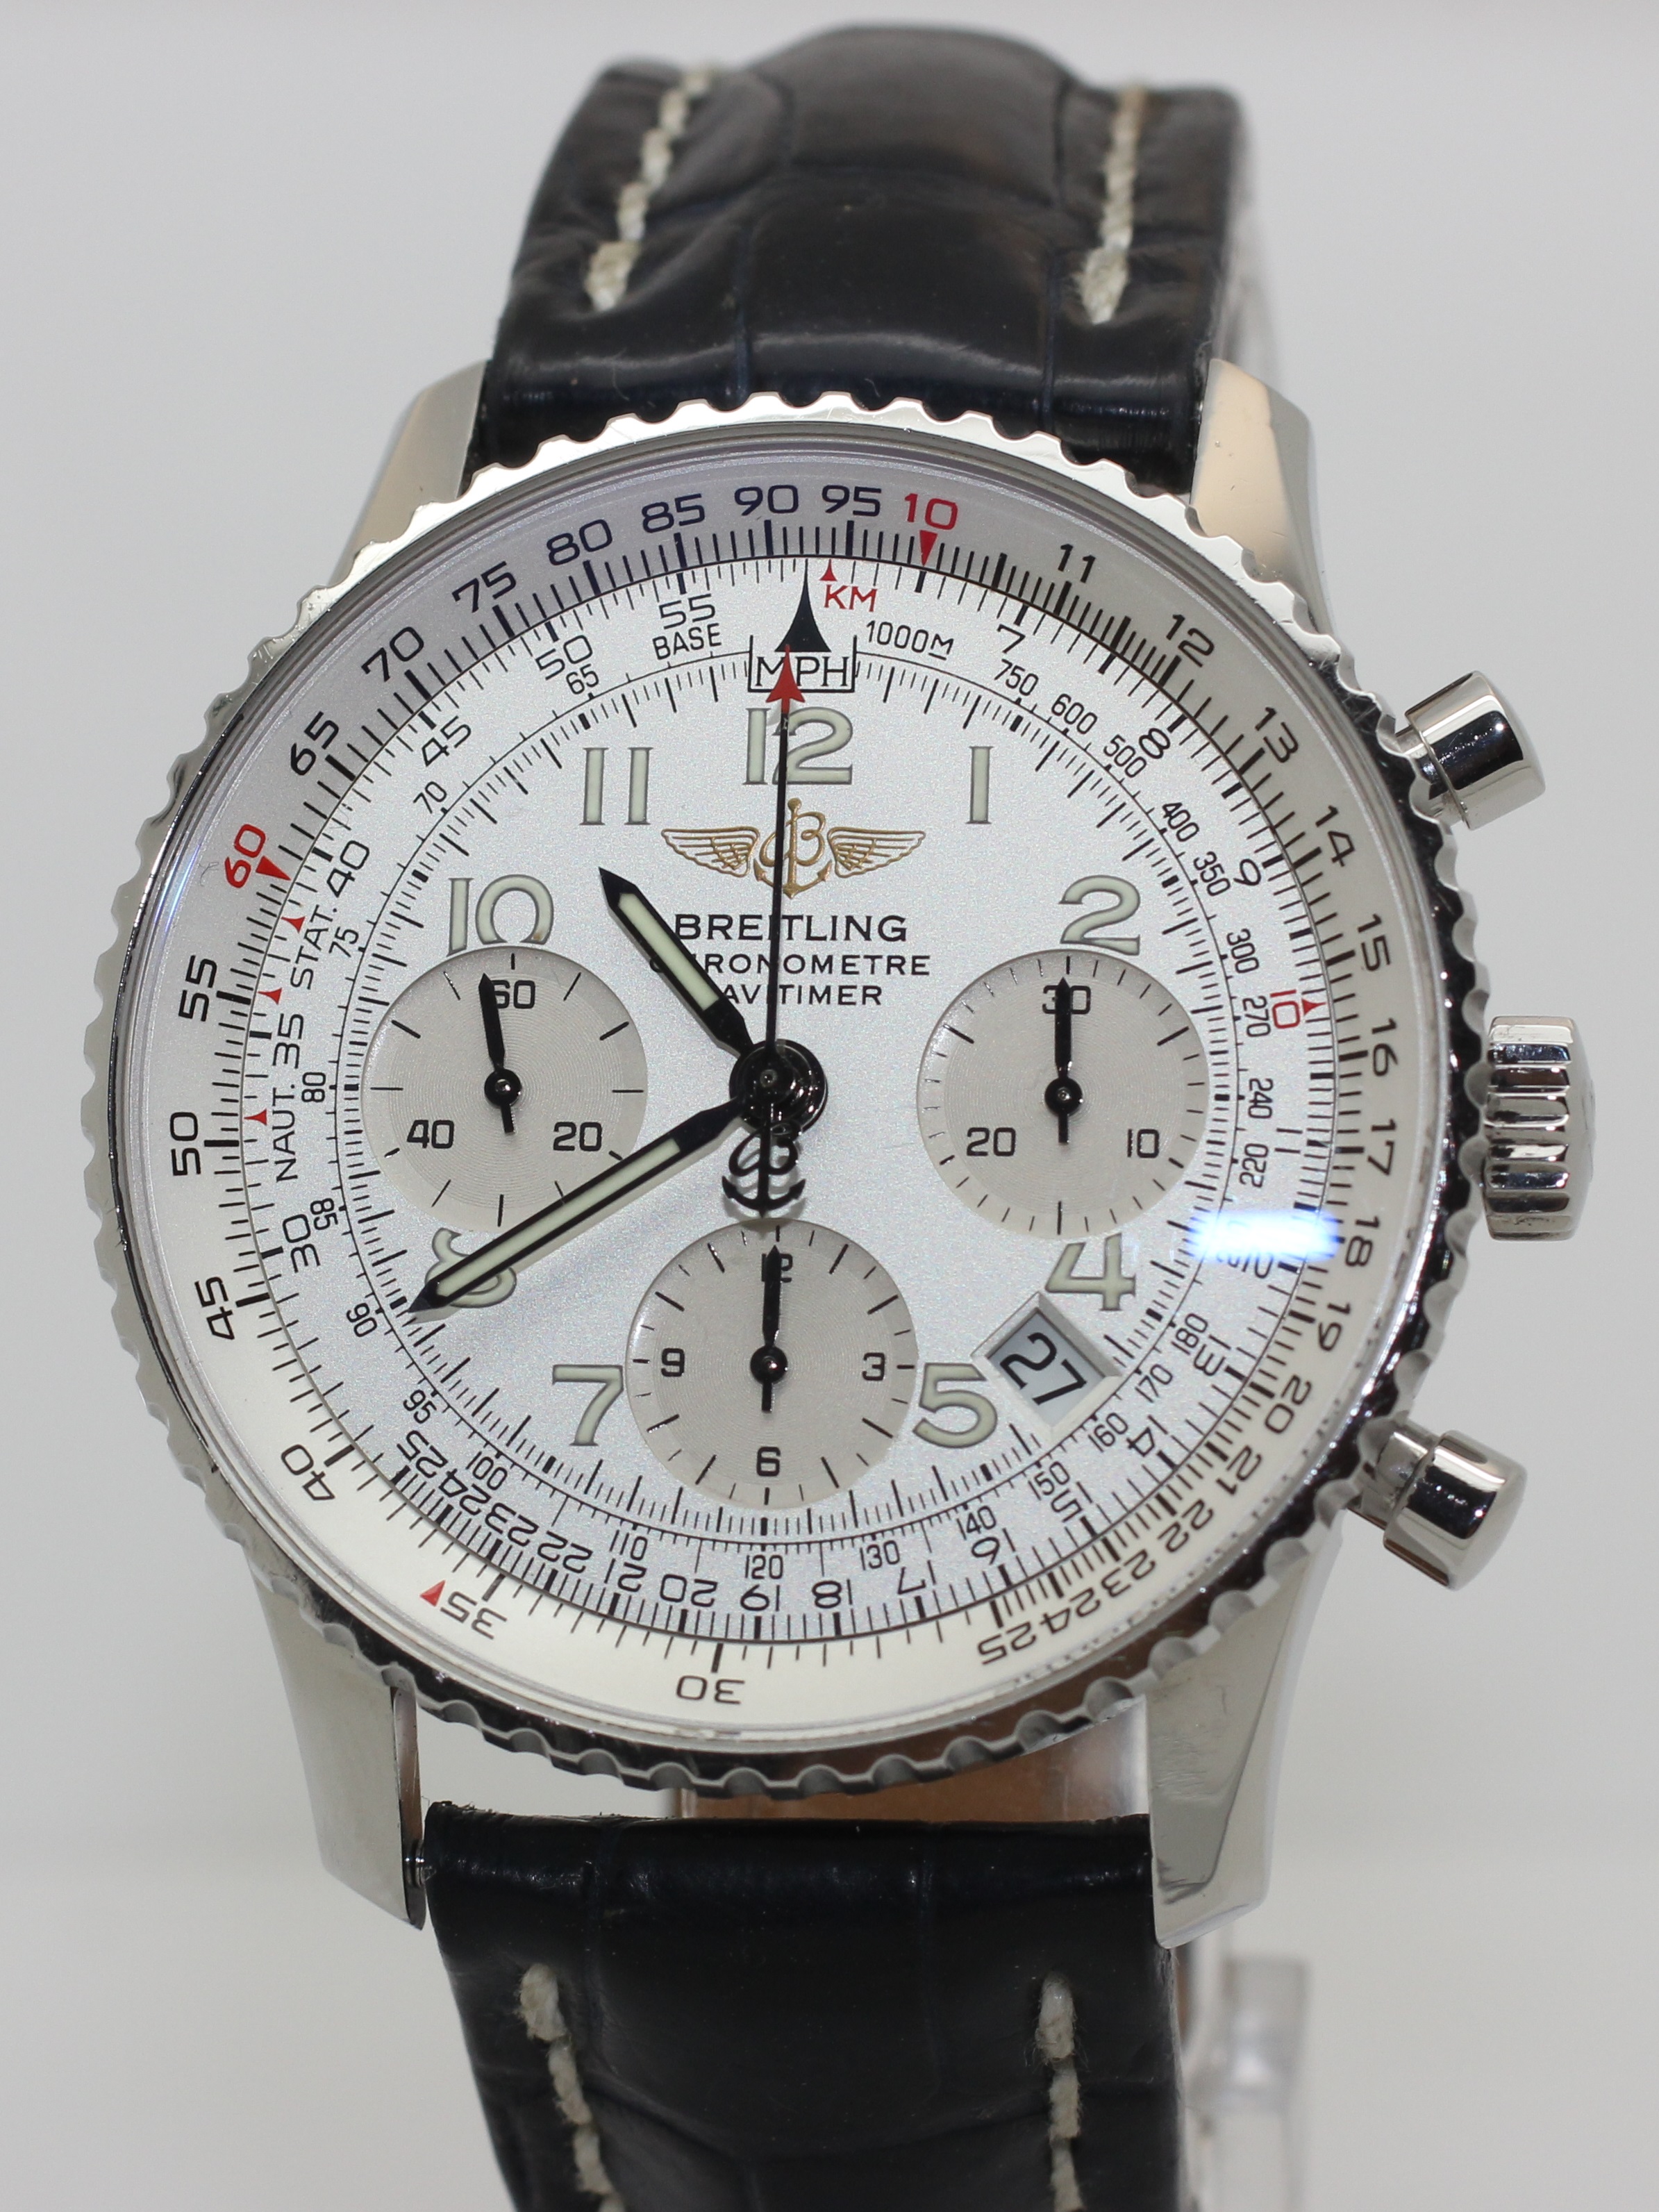 2008 Stainless Steel Breitling Navitimer Chronograph A23322 - Pouch & Papers